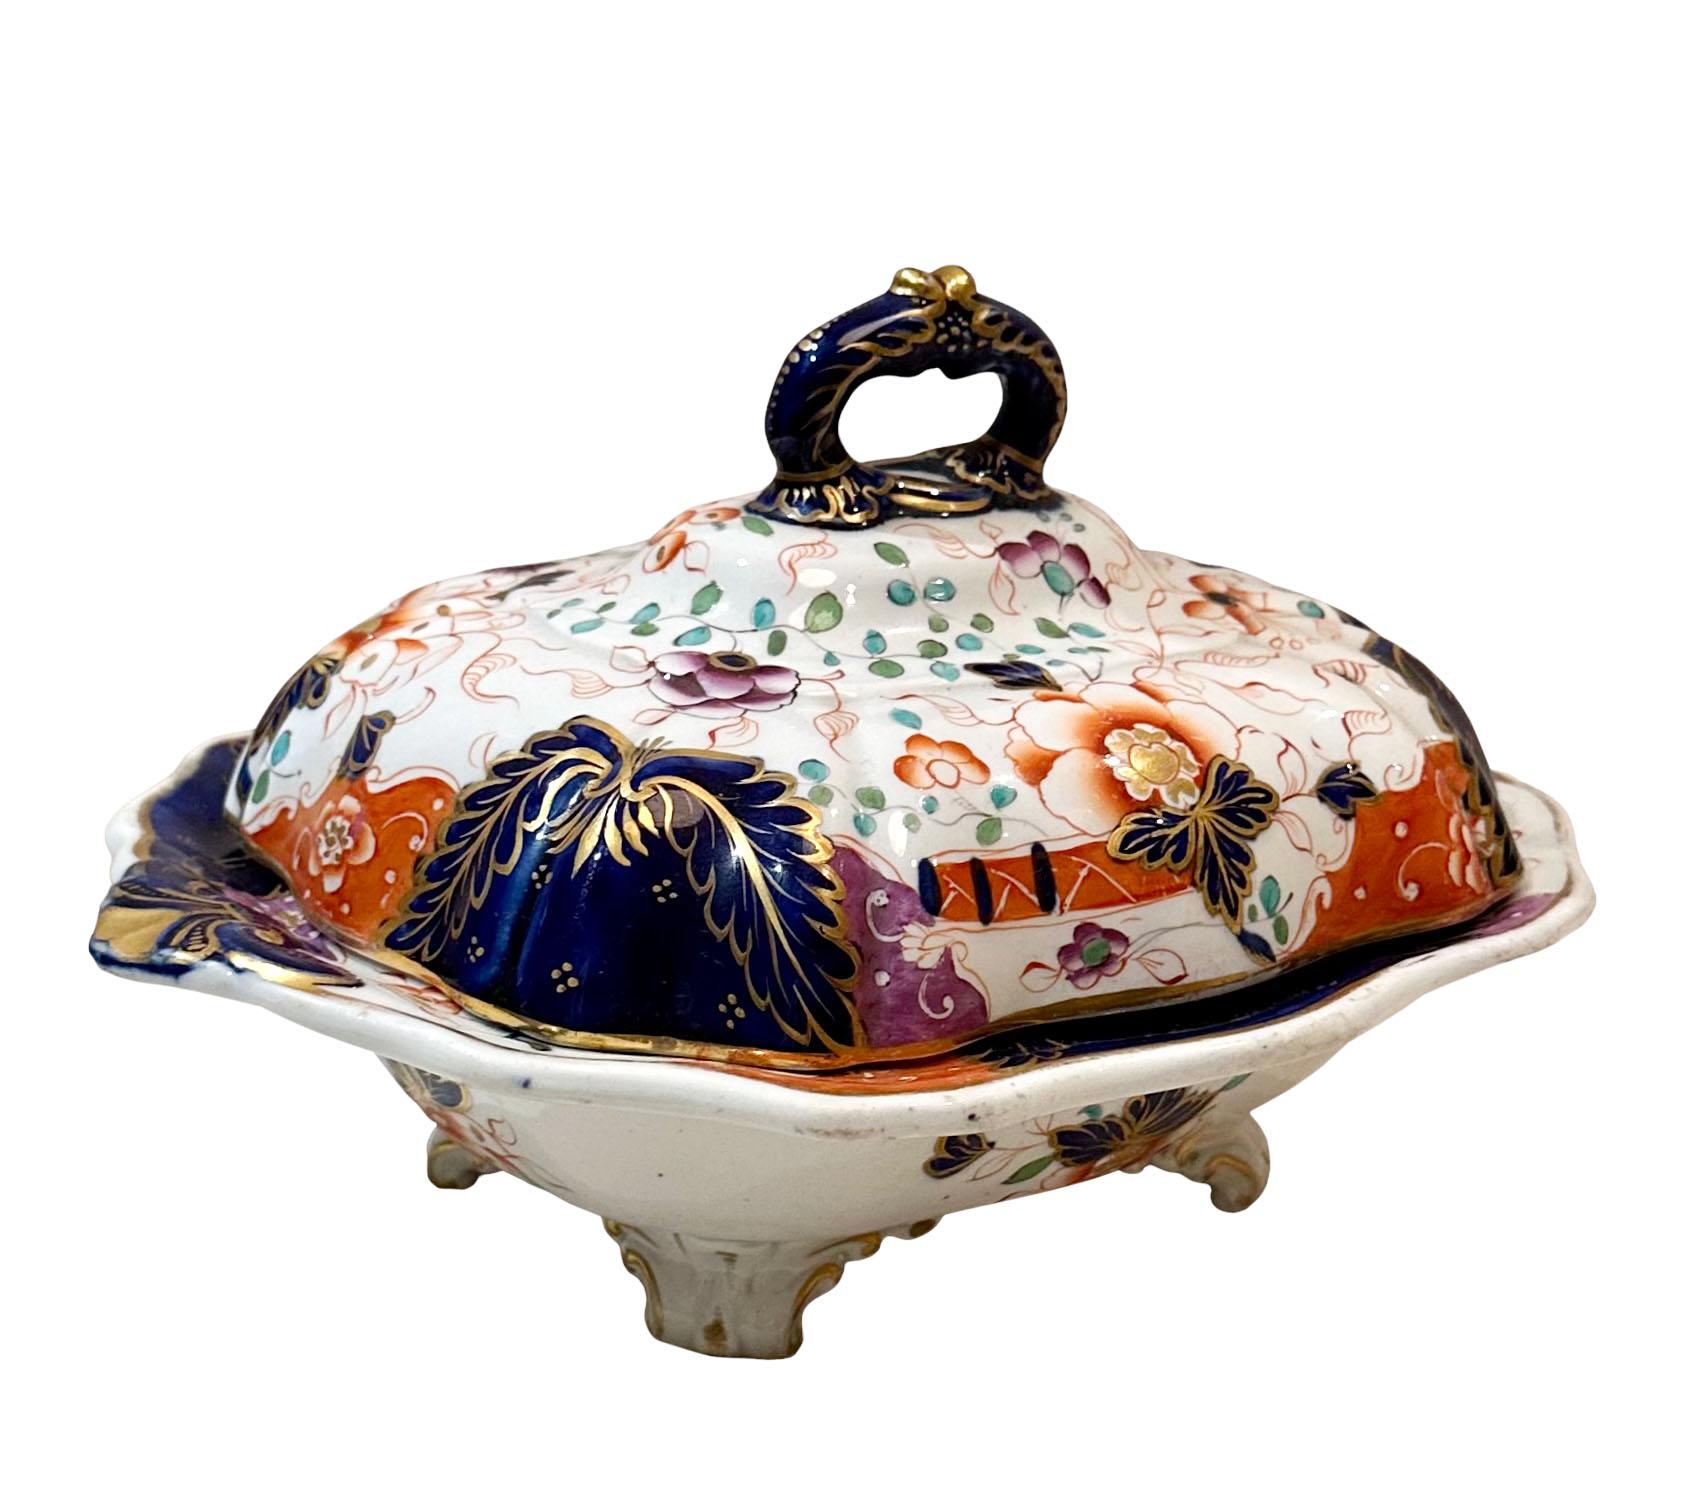 Davenport Covered Vegetable Tureen In Good Condition For Sale In Tampa, FL